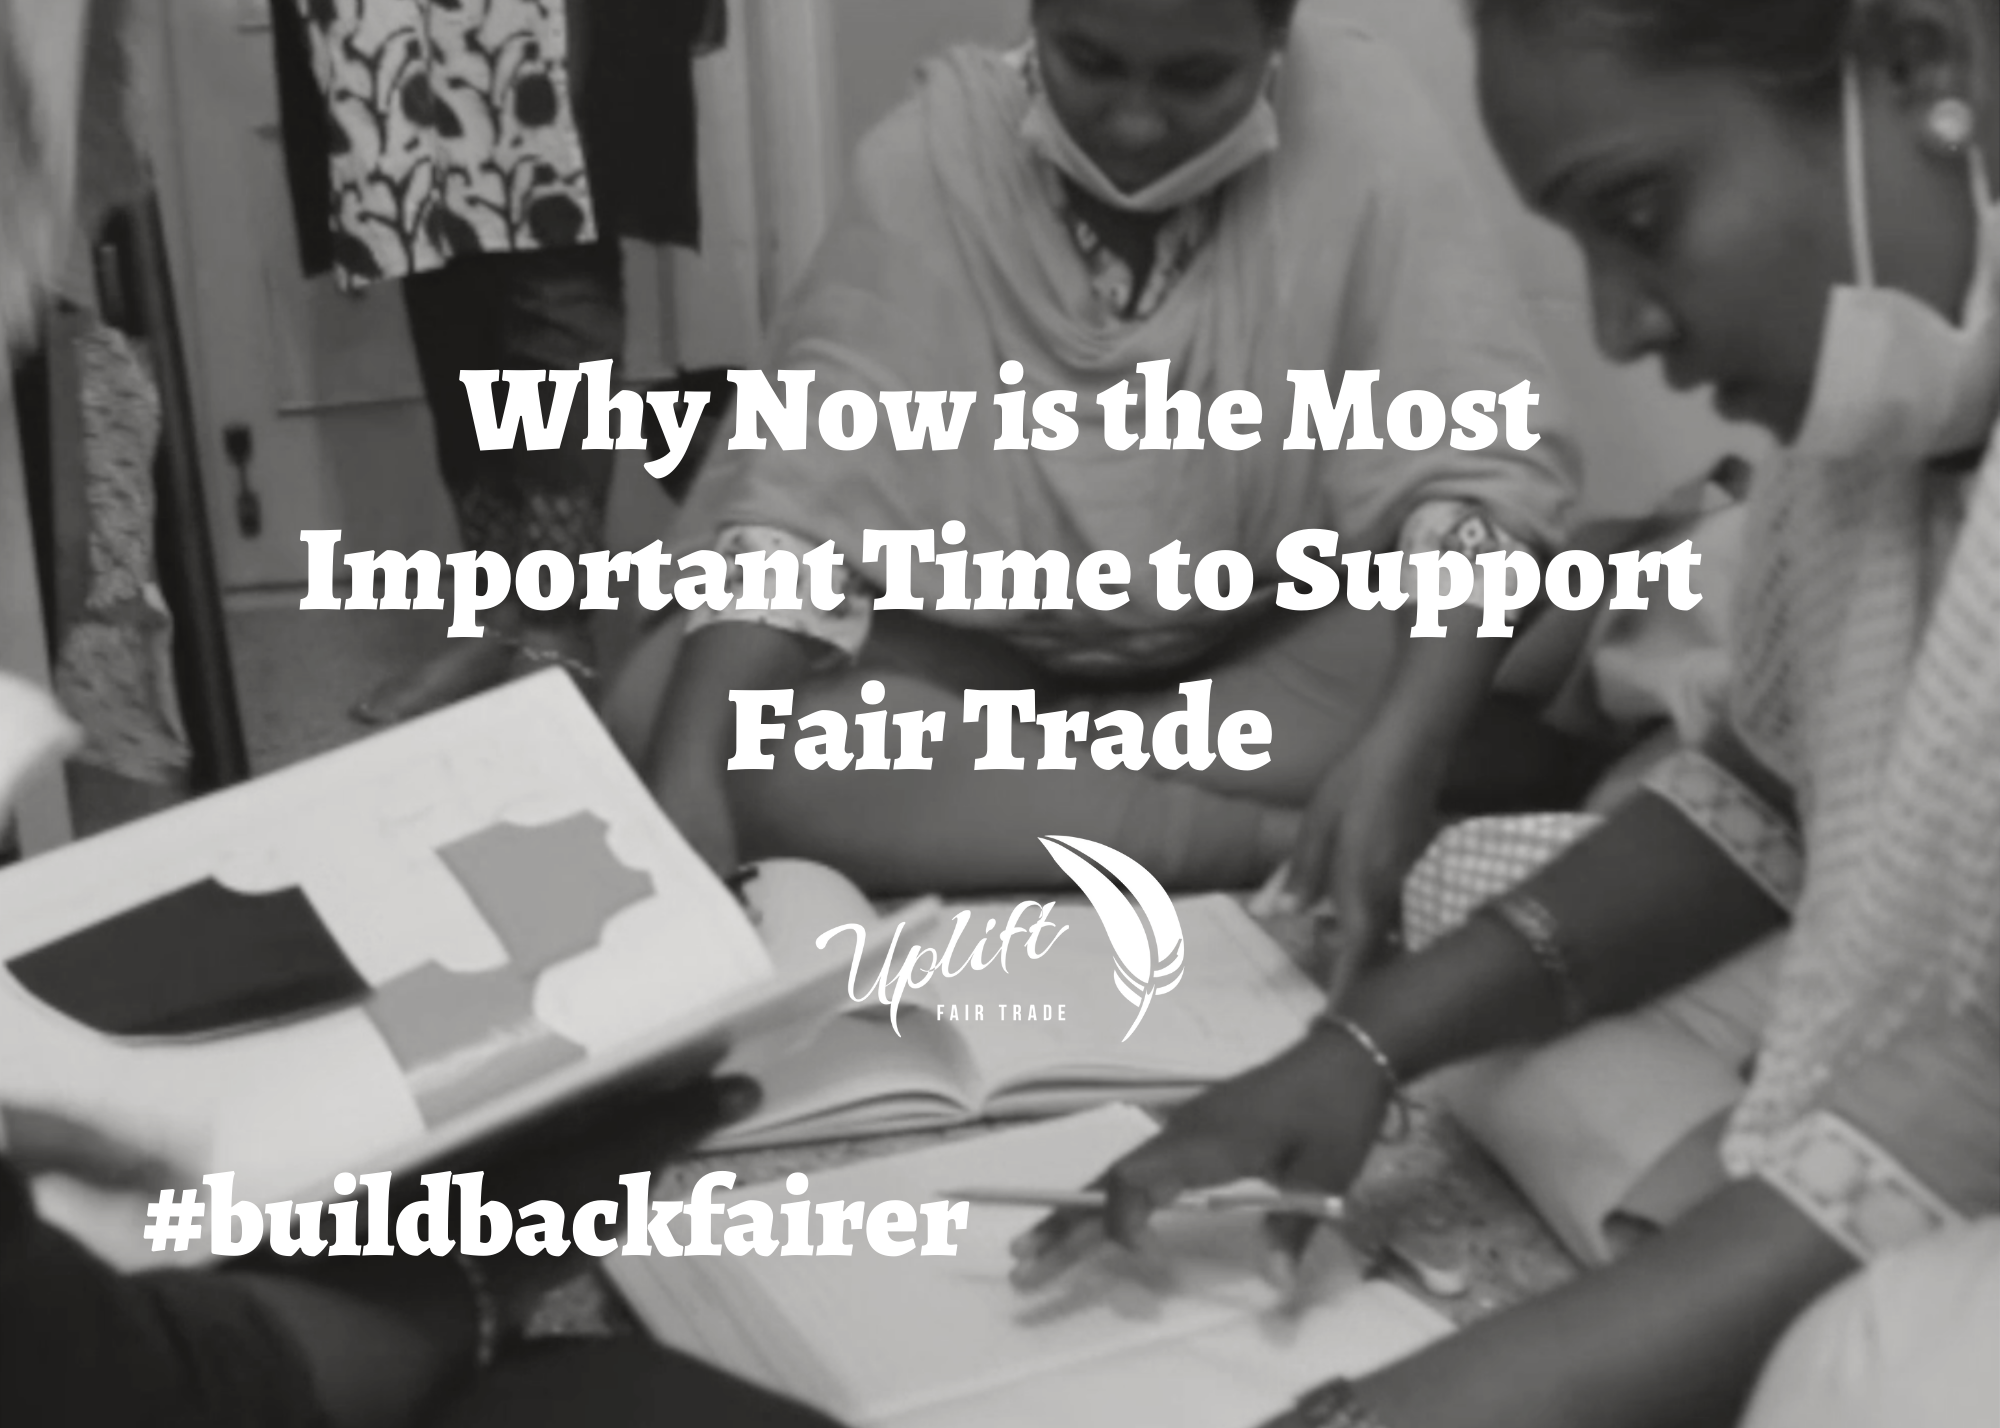 Why Now is the Most Important Time to Support Fair Trade | #buildbackfairer